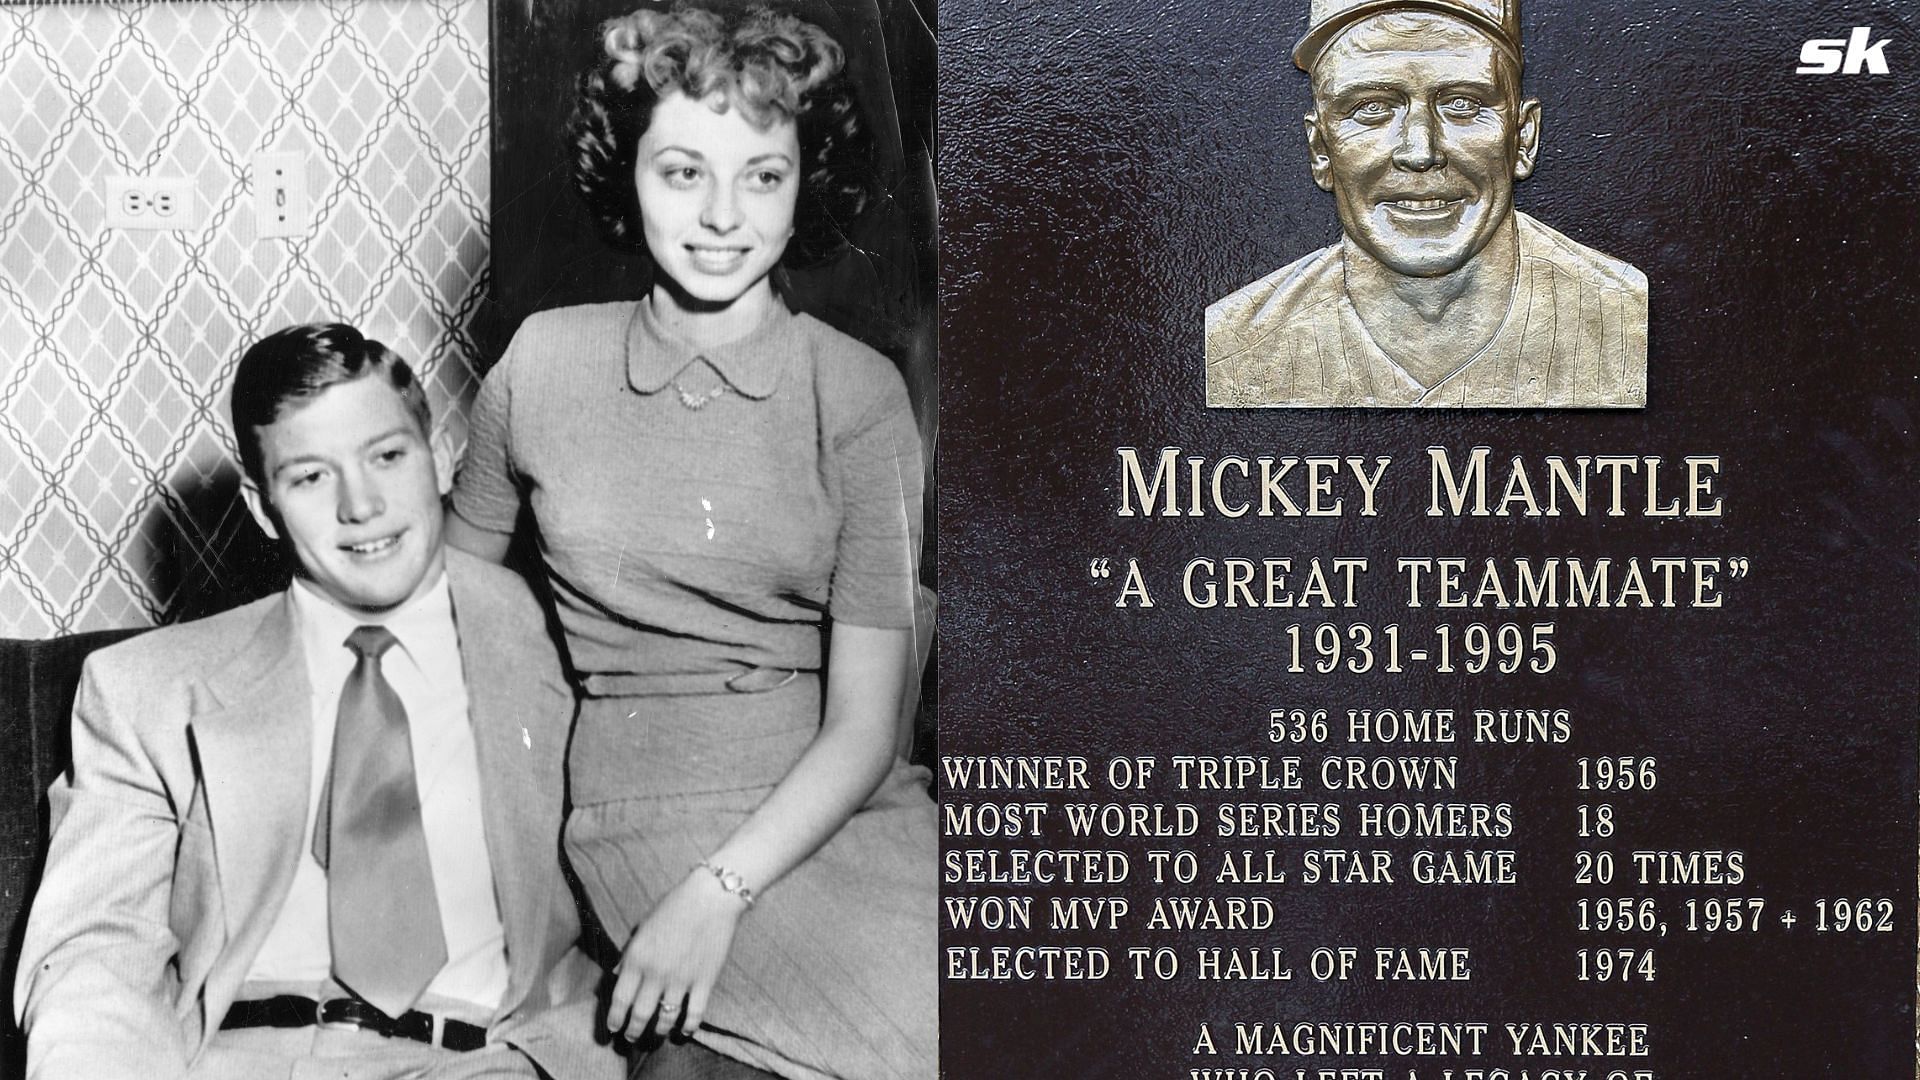 Micky Mantle with his wife, Merlyn Mantle; NEW YORK - MAY 02: The plaque of Mickey Mantle is seen in Monument Park at Yankee Stadium prior to the game between the New York Yankees and the Chicago White Sox on May 2, 2010 in the Bronx borough of New York City. The Yankees defeated the White Sox 12-3. (Photo by Jim McIsaac/Getty Images)